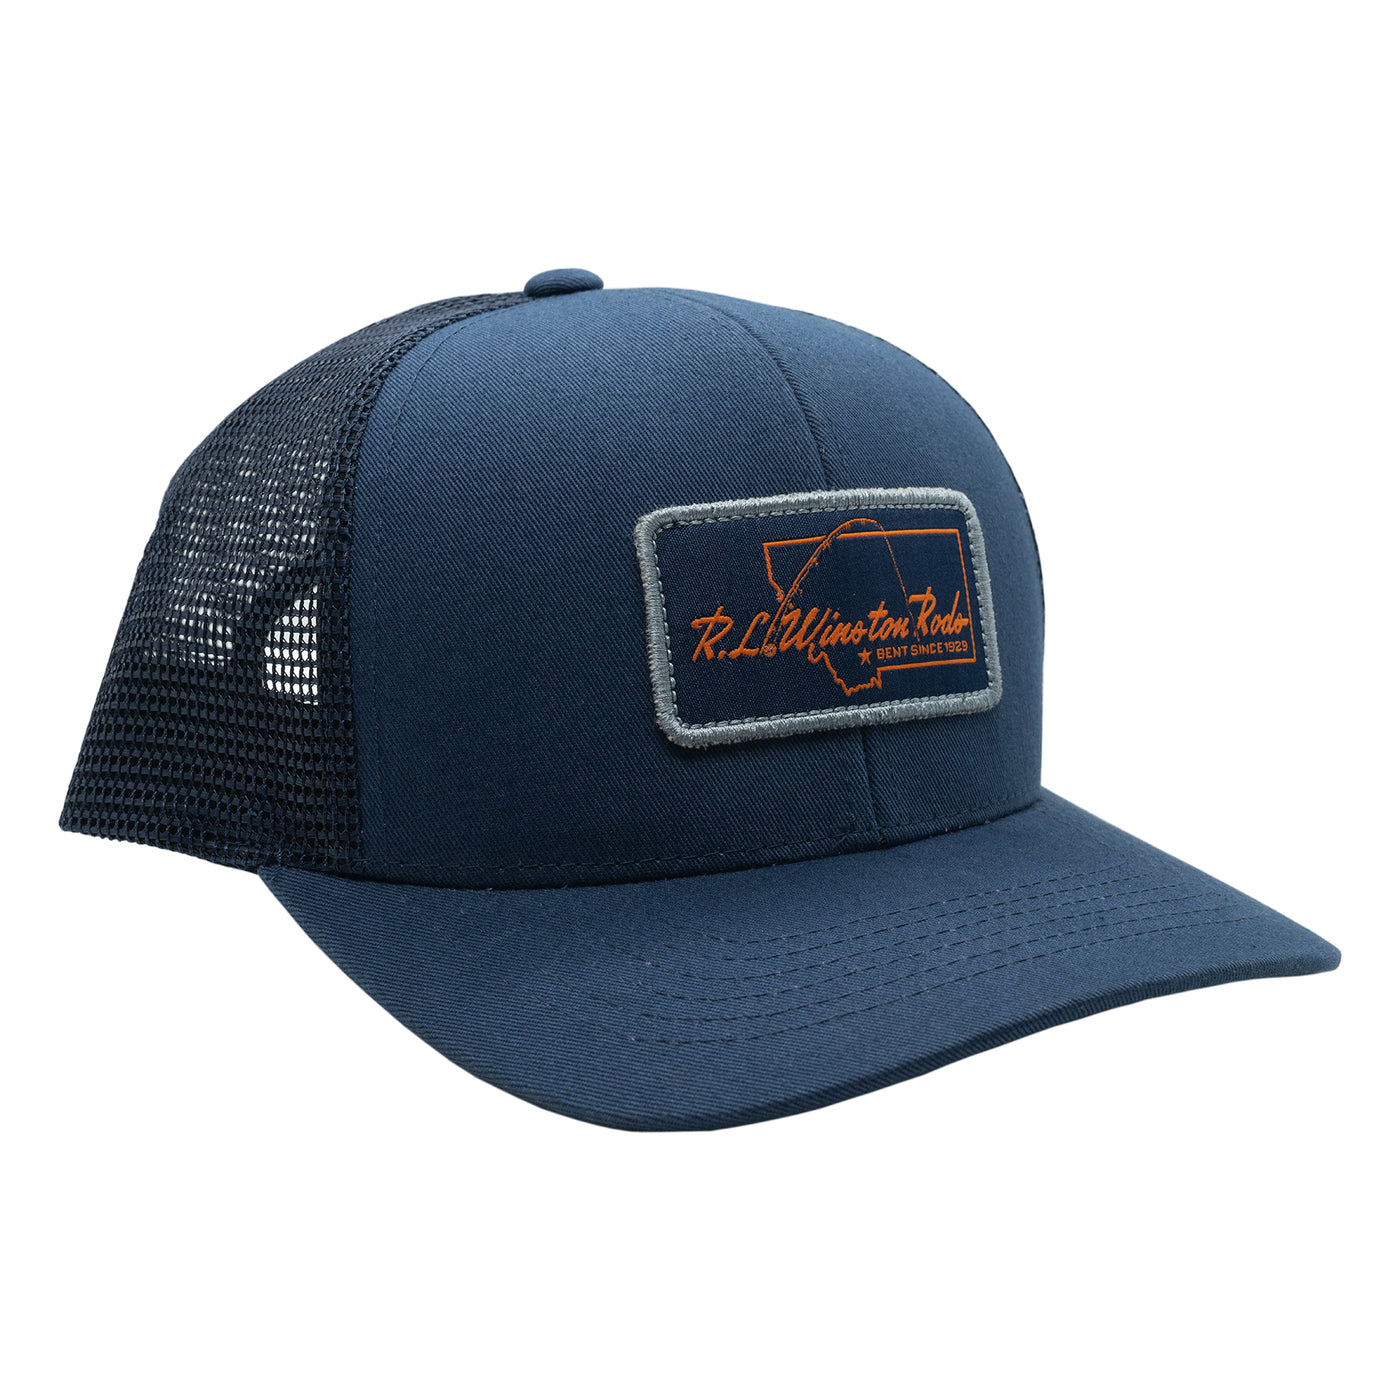 RL Winston Montana Trucker Hat Navy – Bow River Troutfitters